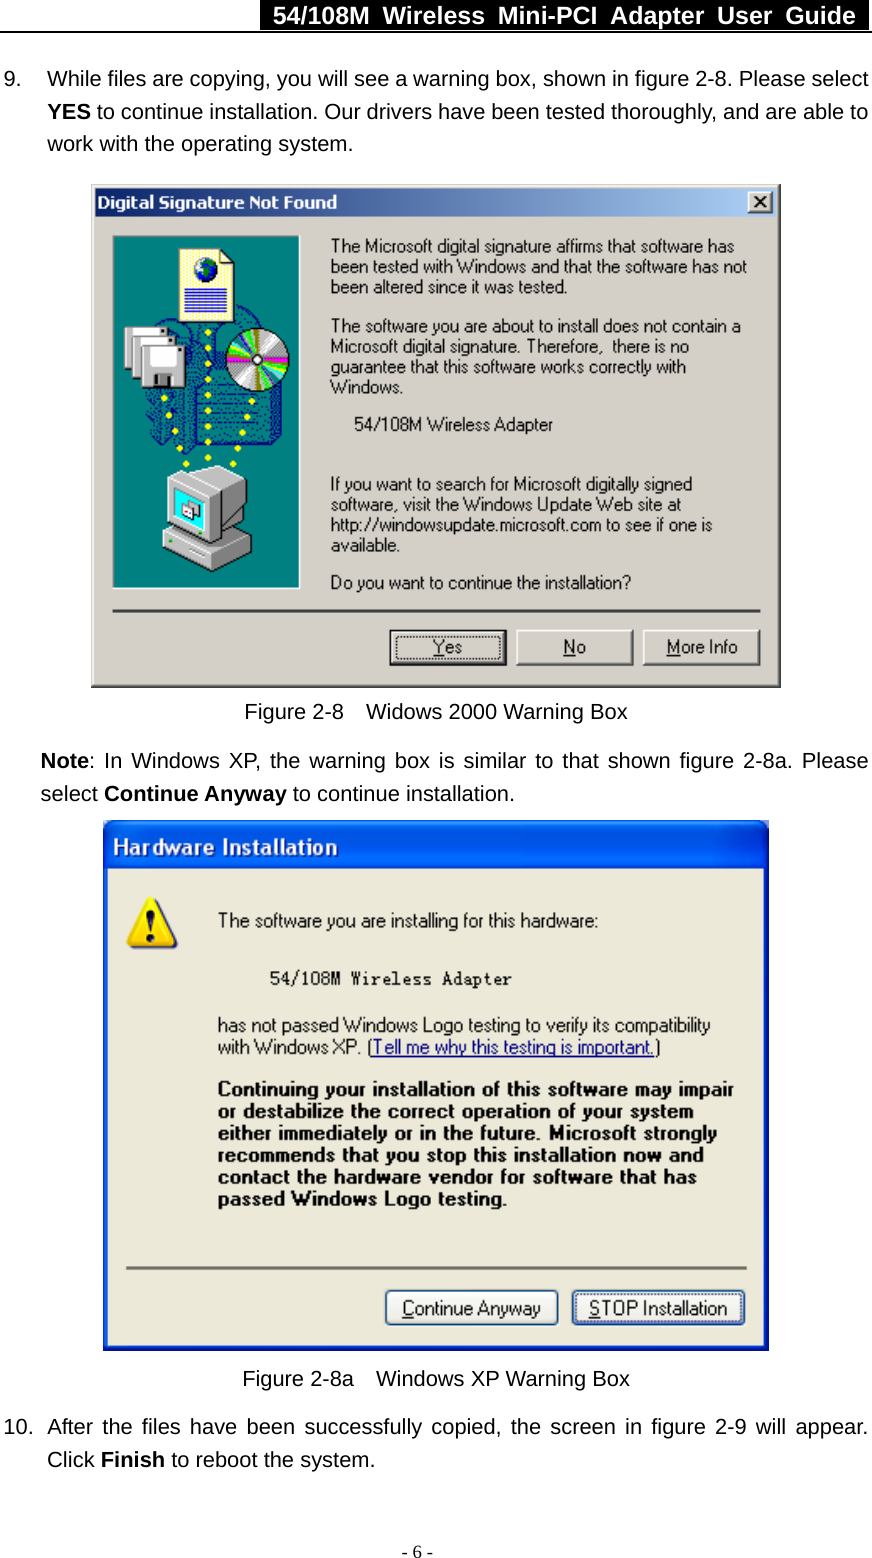   54/108M Wireless Mini-PCI Adapter User Guide  - 6 - 9.  While files are copying, you will see a warning box, shown in figure 2-8. Please select YES to continue installation. Our drivers have been tested thoroughly, and are able to work with the operating system.  Figure 2-8    Widows 2000 Warning Box Note: In Windows XP, the warning box is similar to that shown figure 2-8a. Please select Continue Anyway to continue installation.  Figure 2-8a    Windows XP Warning Box 10.  After the files have been successfully copied, the screen in figure 2-9 will appear. Click Finish to reboot the system. 